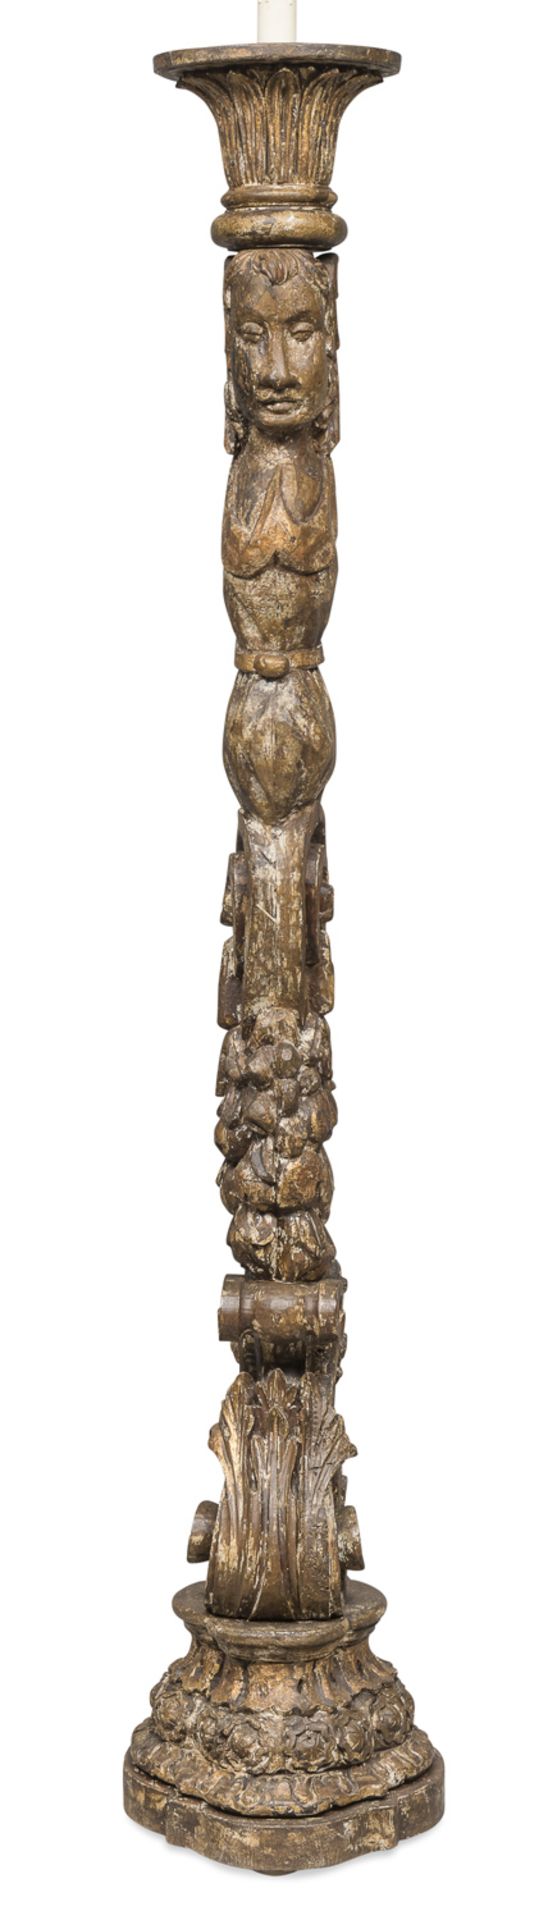 TALL WOODEN FLOOR CANDLESTICK NORTHERN ITALY 16th CENTURY